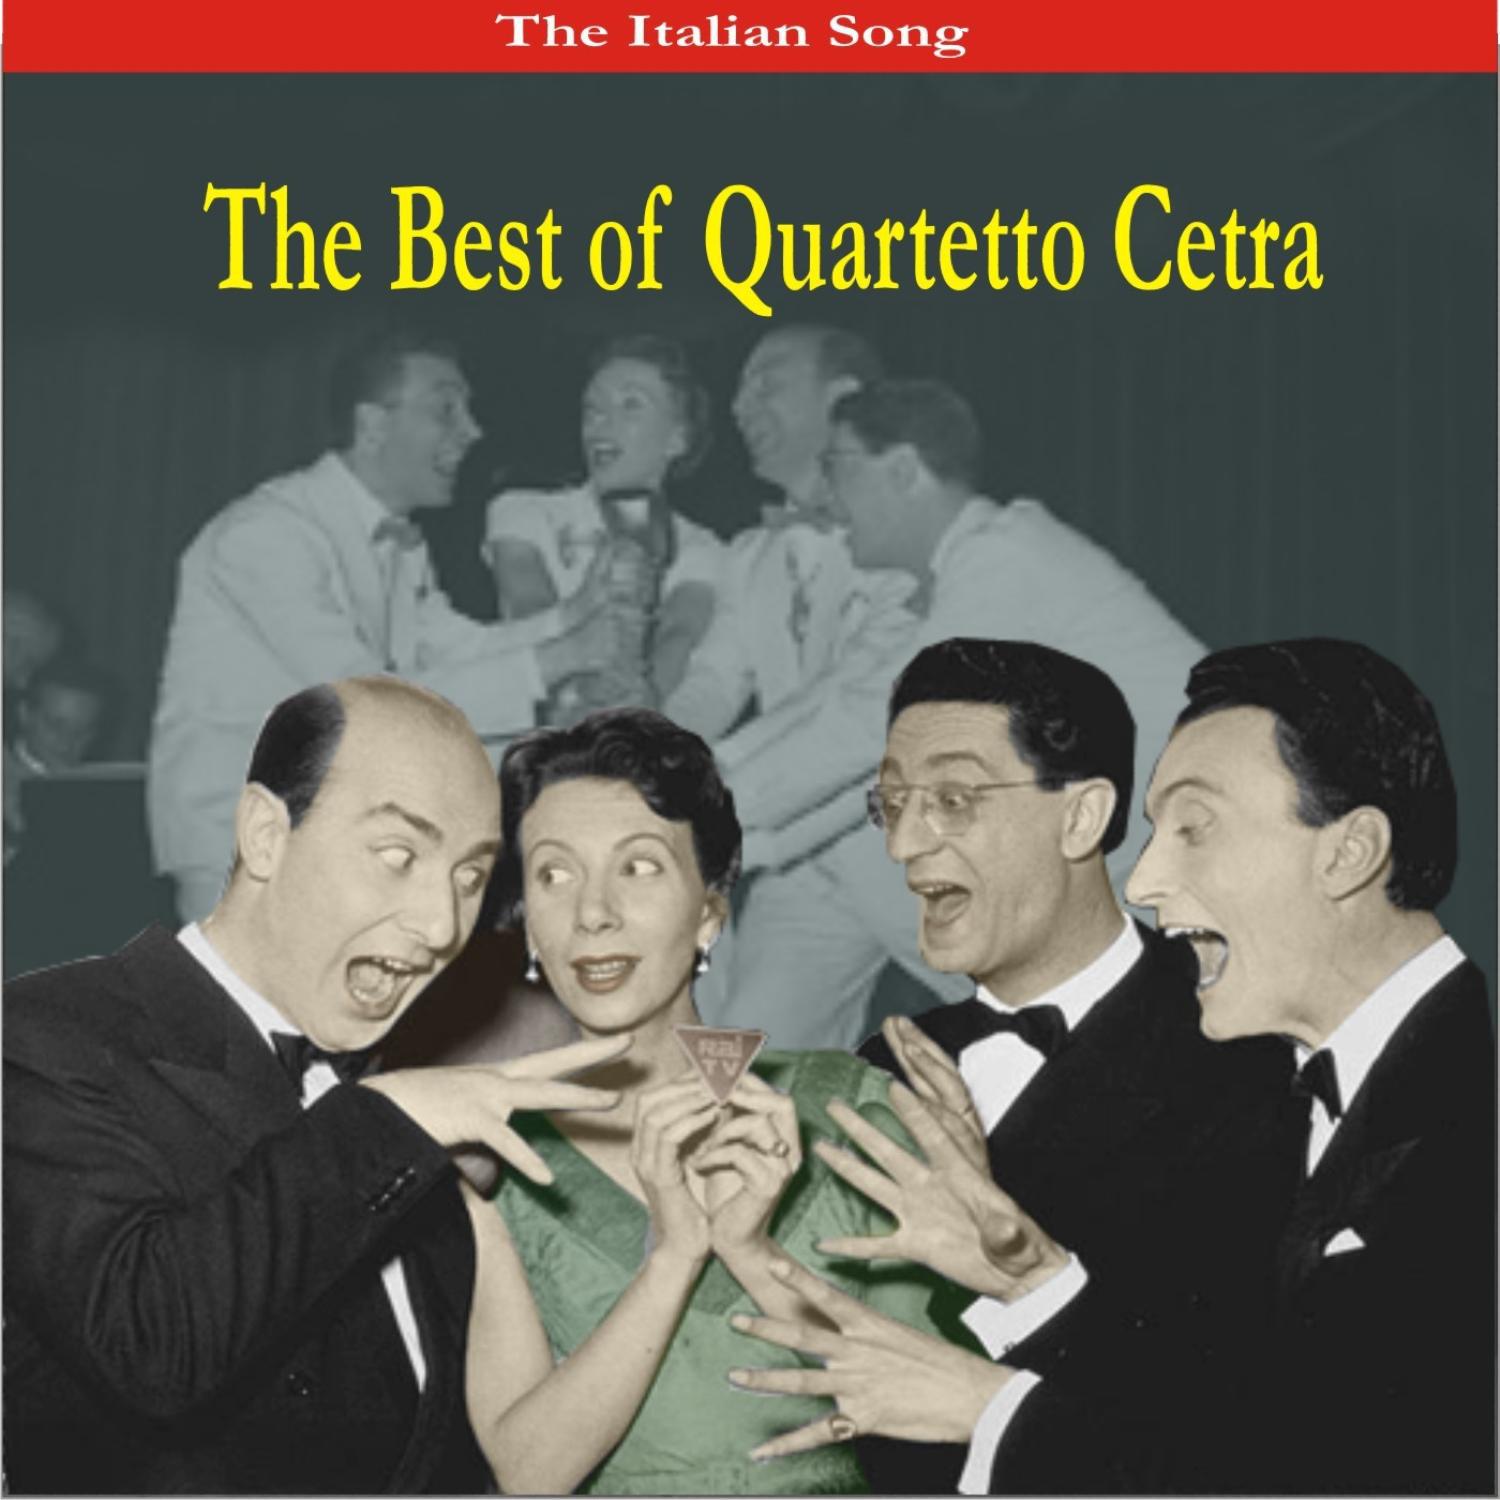 The Italian Song - The Best of Quartetto Cetra专辑